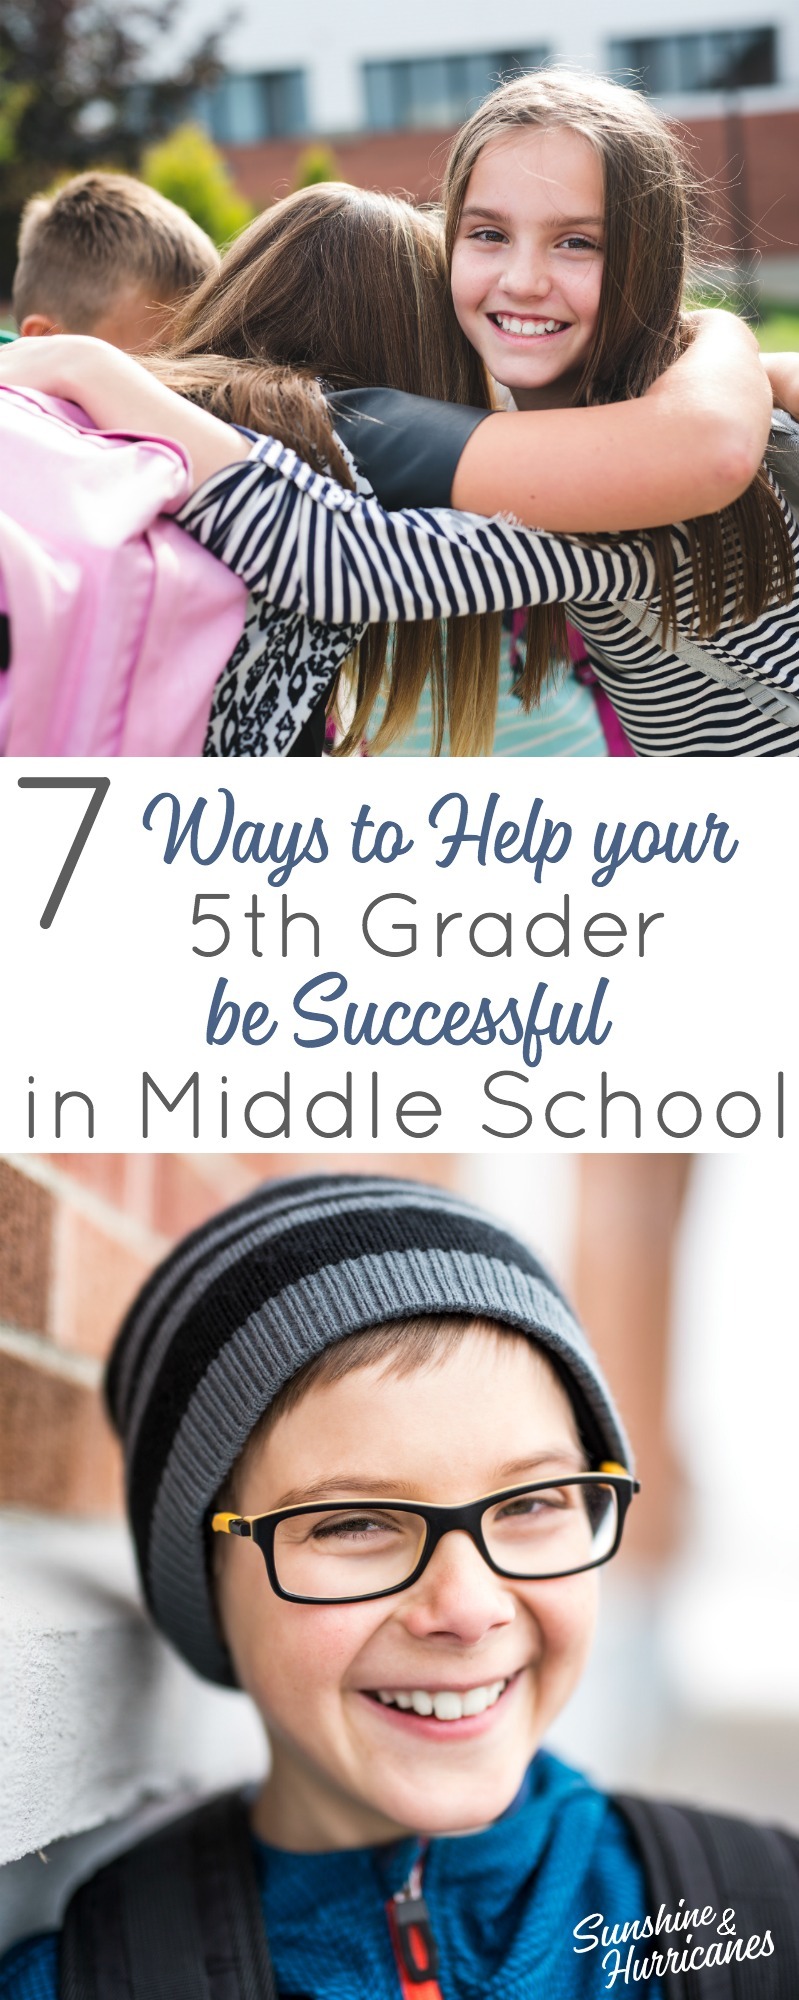 7 life skills to help your 5th grader transition to middle school successfully 